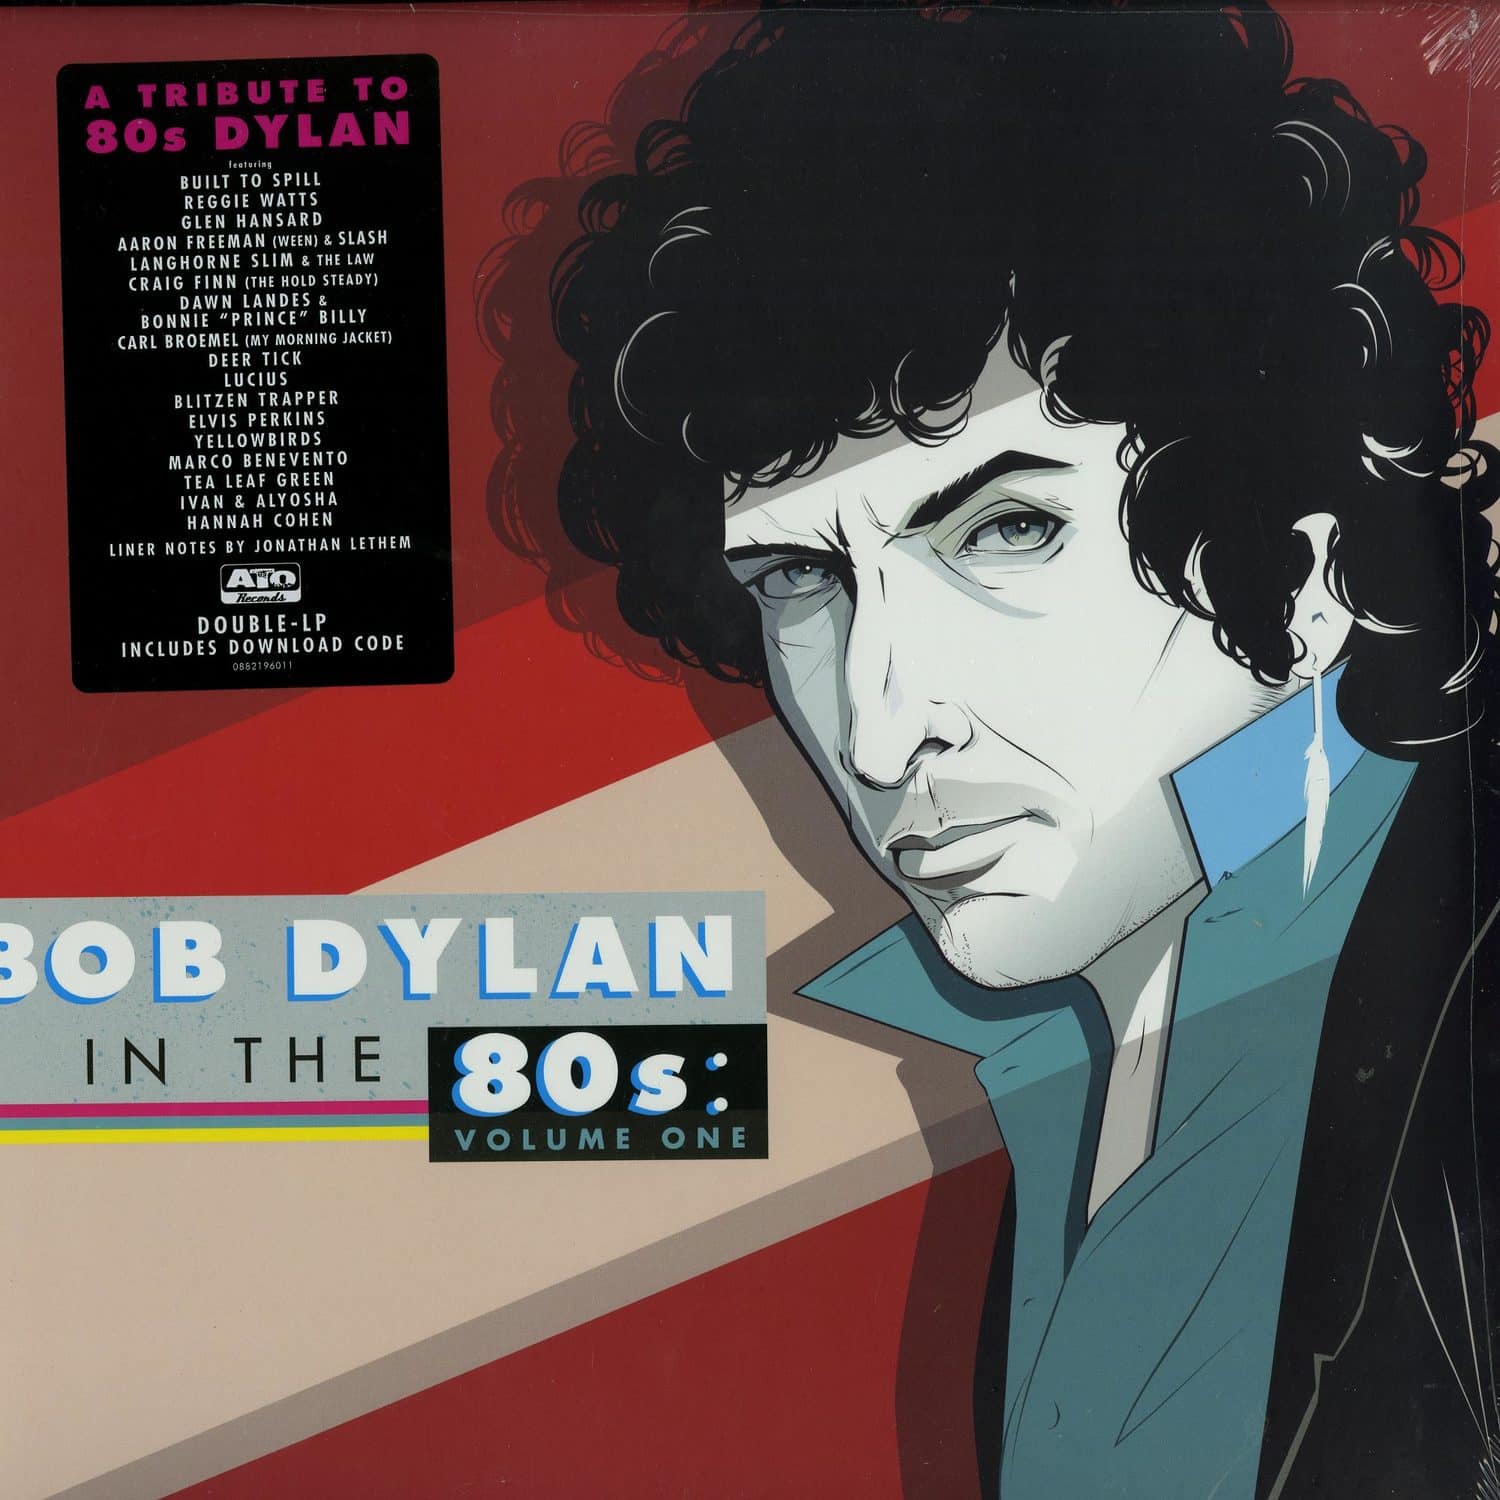 Various Artists - A TRIBUTE TO BOB DYLAN IN THE 80S: VOLUME ONE 